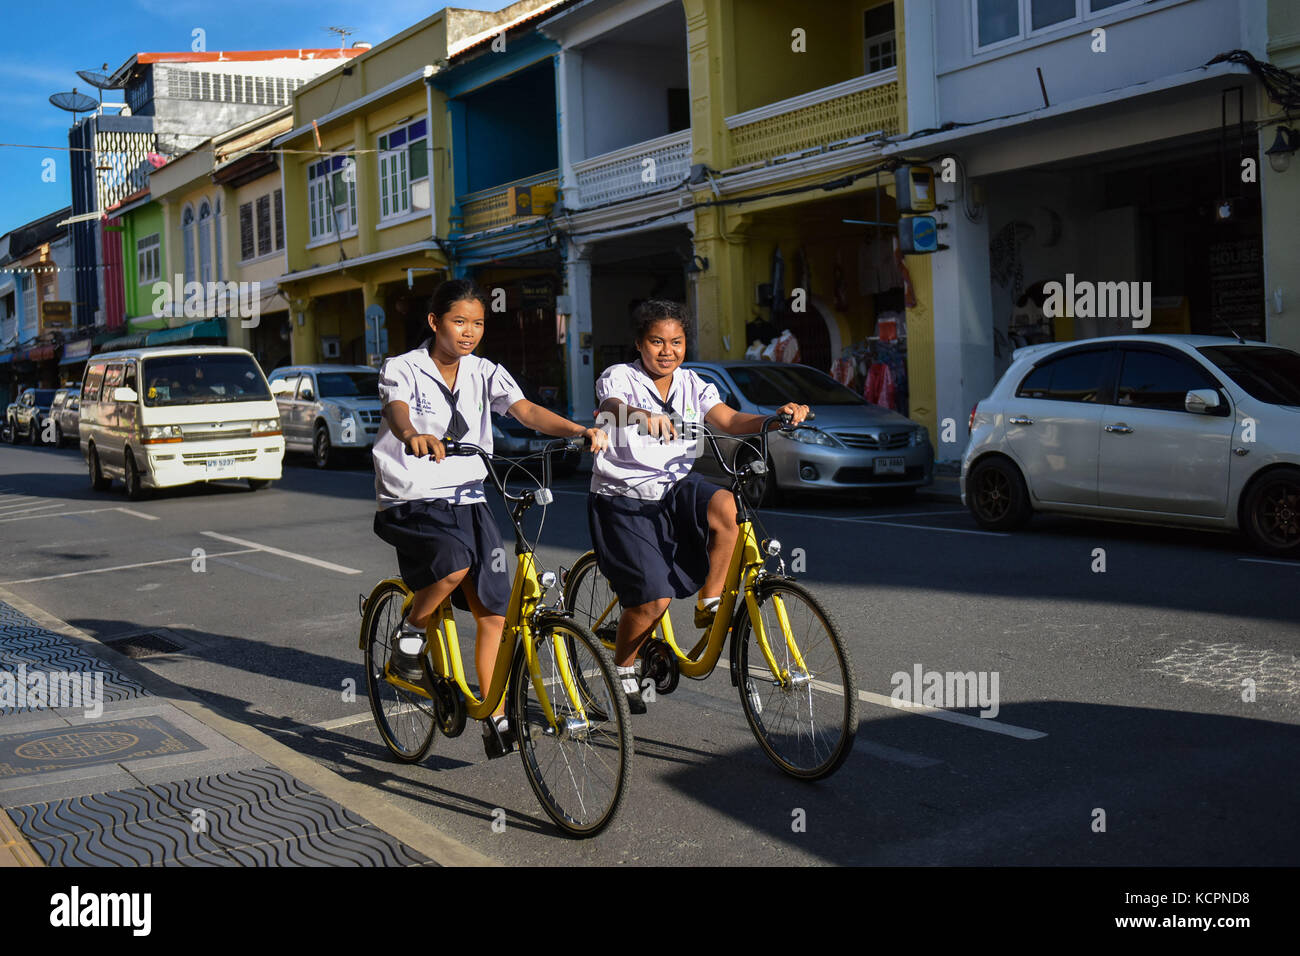 Phuket, Thailand. 5th Oct, 2017. Local students ride ofo sharing-bikes at a commercial area in Phuket, Thailand, Oct. 5, 2017. China's dock-less bike-sharing company ofo provided more than 1,000 bikes in Phuket's key locations in late September and offered a 1-month free trial without deposit fee. Now the bike-sharing service has benefited local residents and tourists. Ofo's regular service fee will be charged at 5 Baht per 30 minutes usage, with a deposit fee of 99 Baht. Credit: Li Mangmang/Xinhua/Alamy Live News Stock Photo